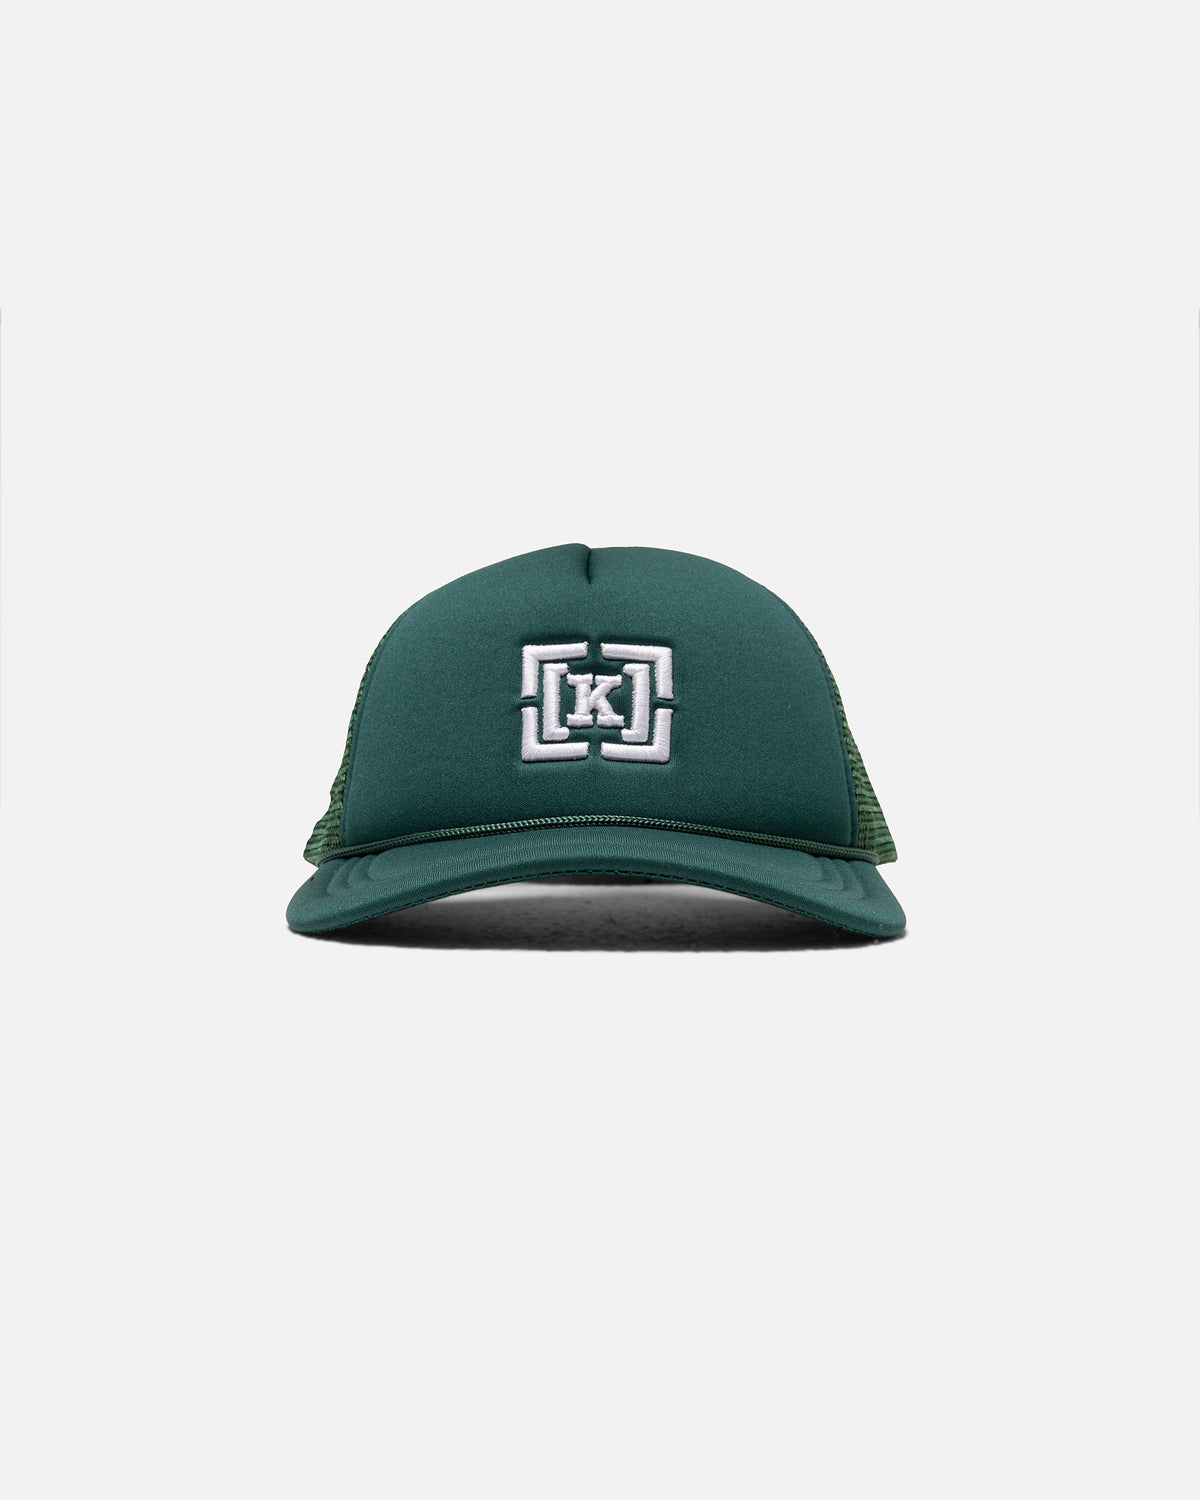 TRUCKER - FOREST / FRONT